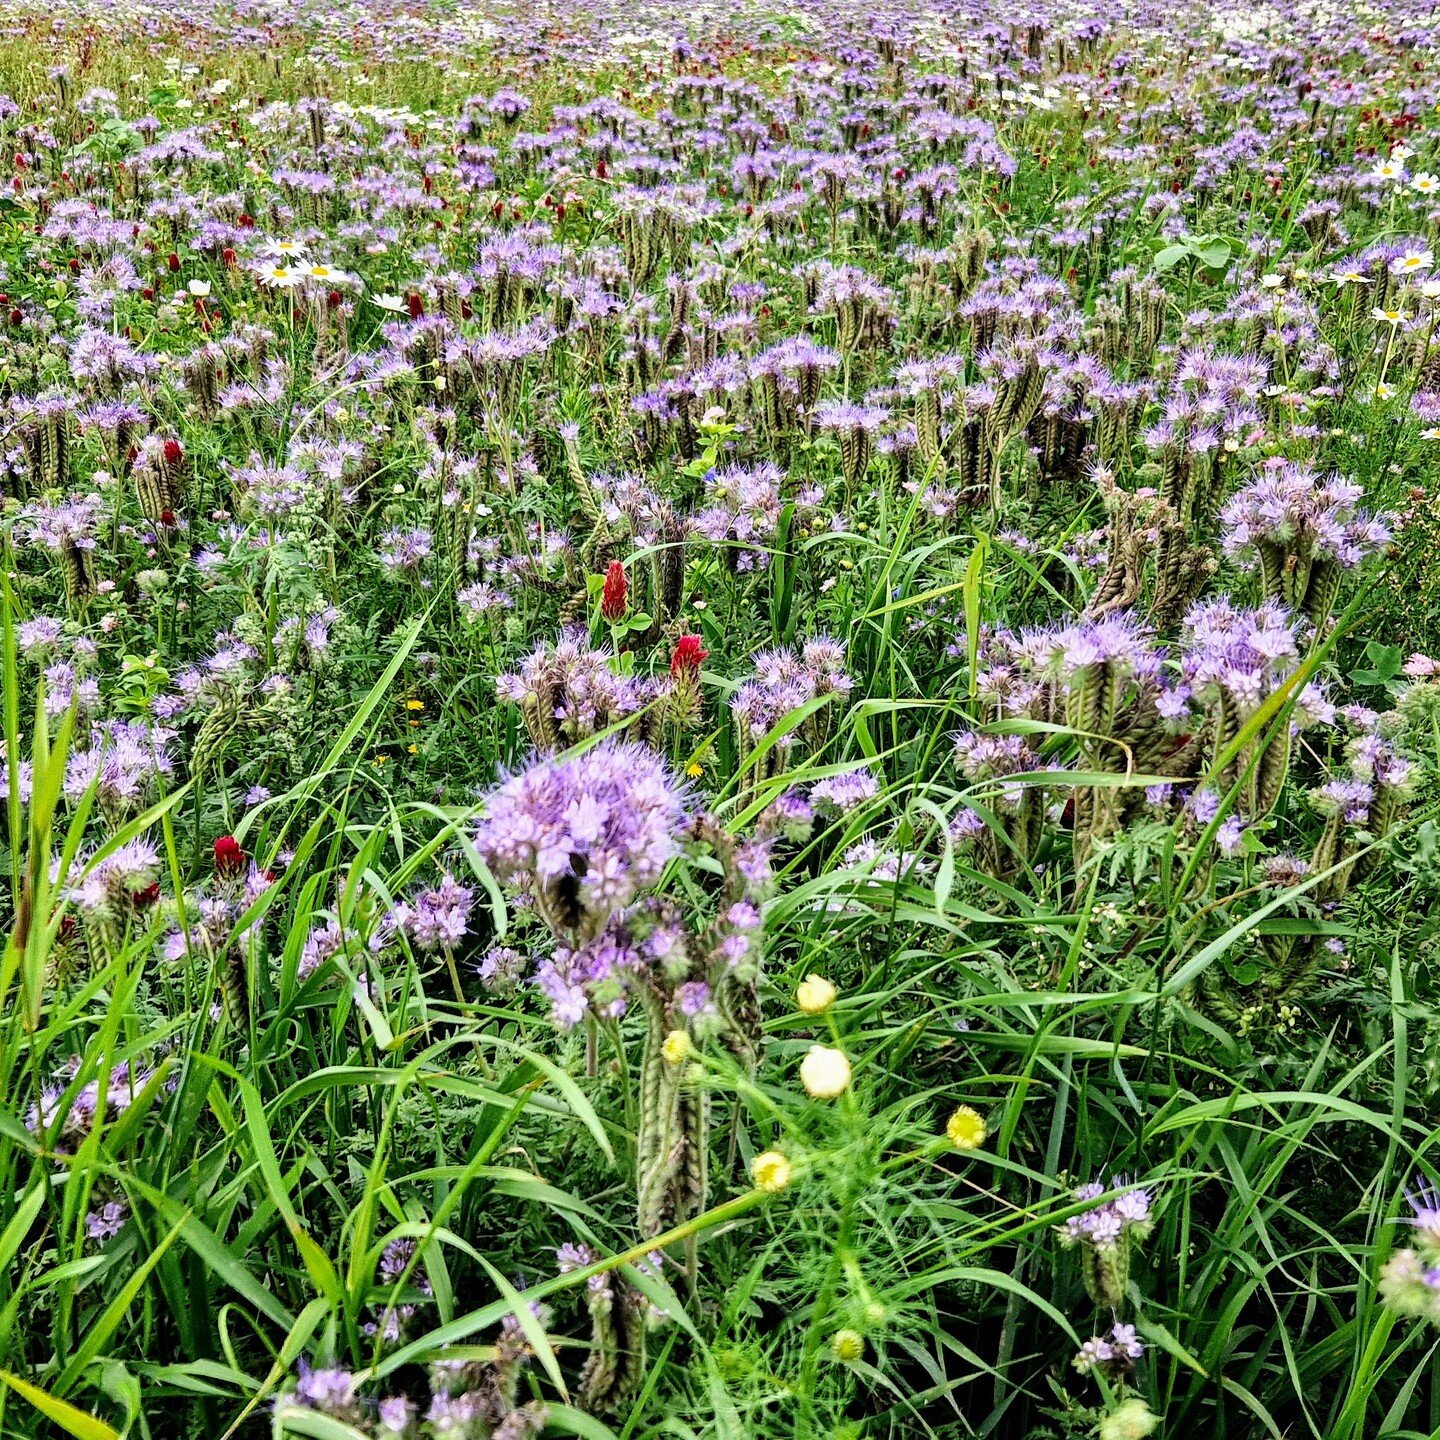 Look closely and you'll see a mesmerizing spectacle of wildflowers dancing in the wind. Fields awash with a sea of Tansies (Phacelia tanacetifolia) painting a vibrant canvas of purples and greens. Each one, a tiny universe of Nordic flora, all co-exi